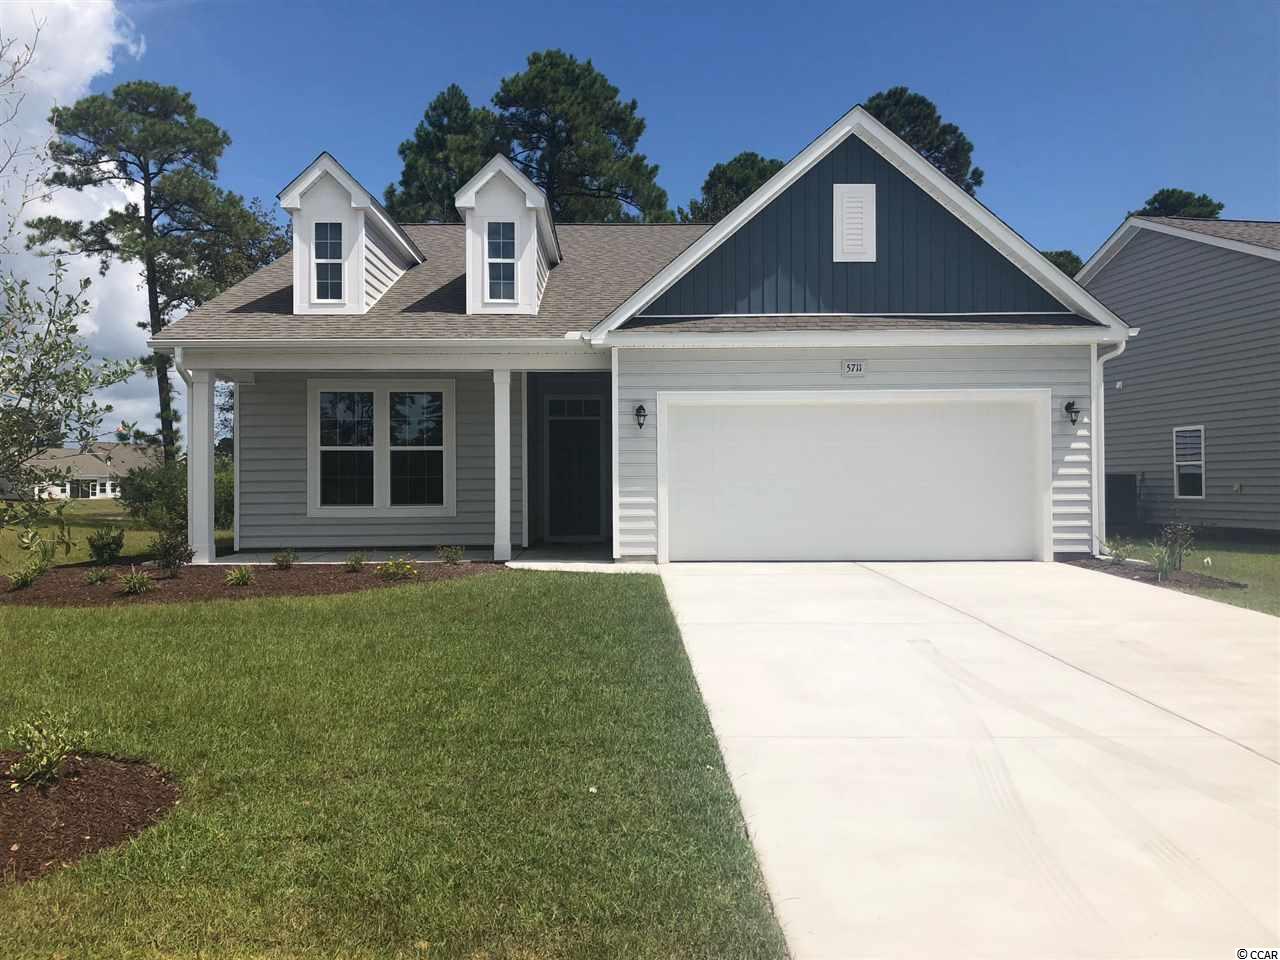 5711 Cottonseed Ct. Myrtle Beach, SC 29579